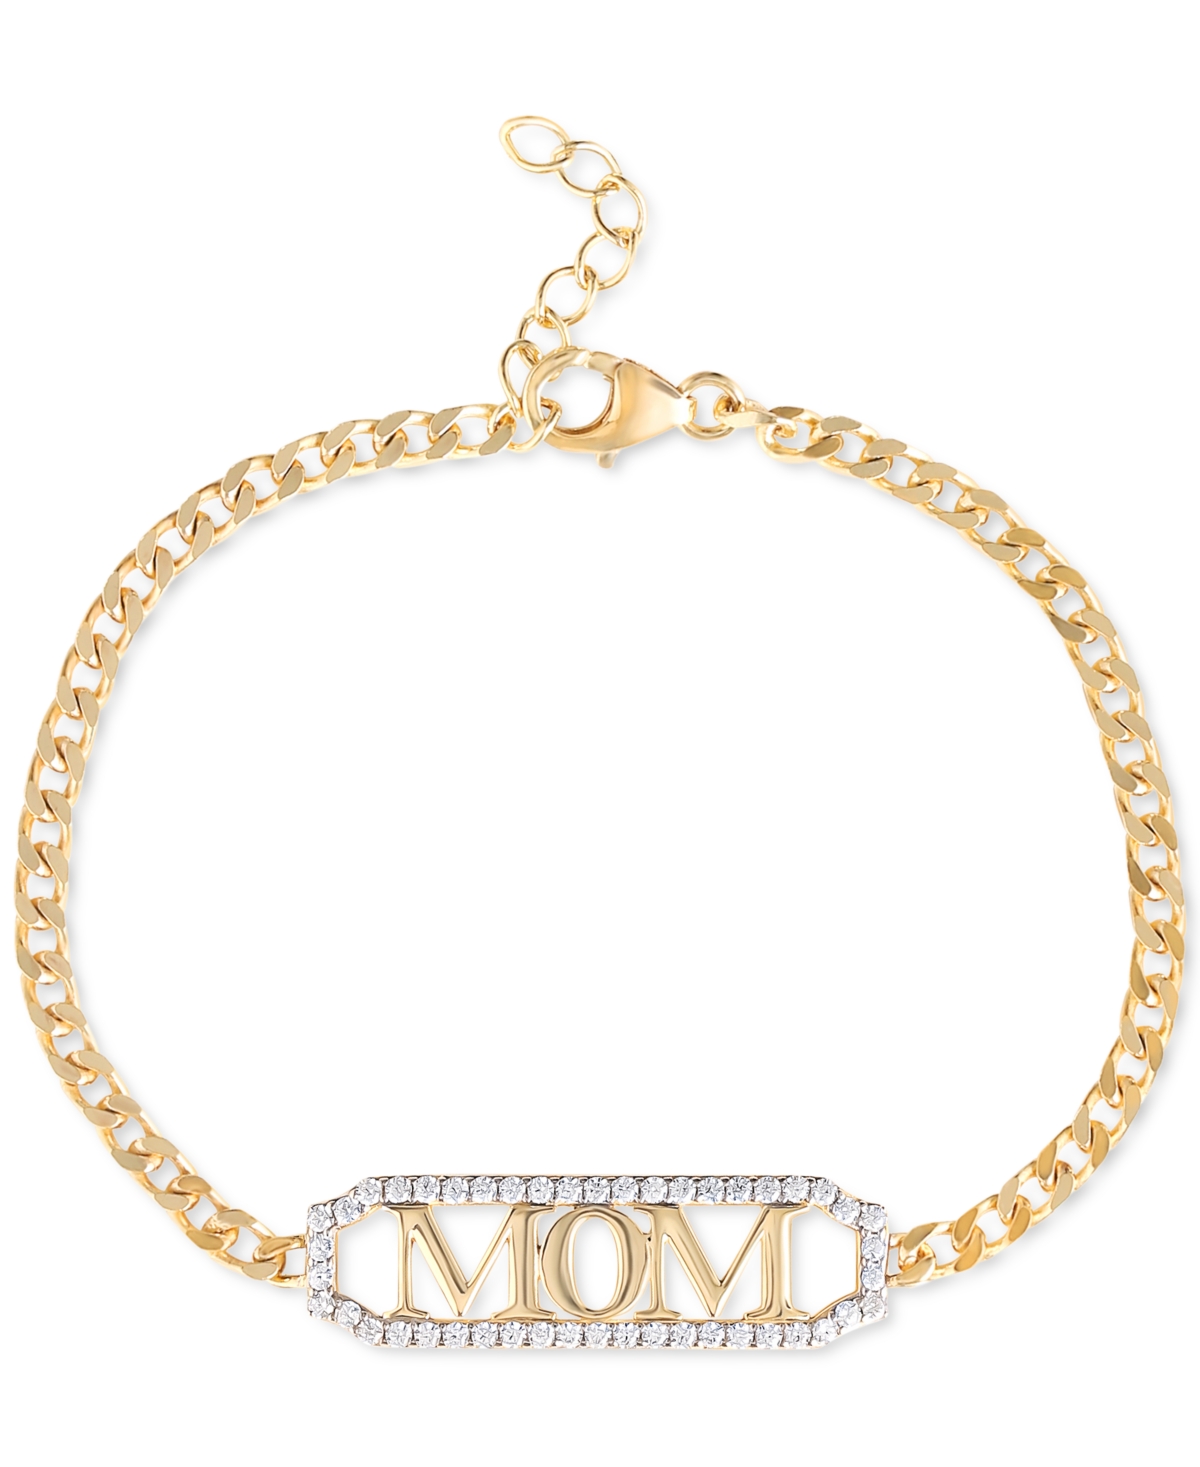 Giani Bernini Cubic Zirconia Mom Curb Link Chain Bracelet In 18k Gold-plated Sterling Silver, Created For Macy's In Gold Over Silver